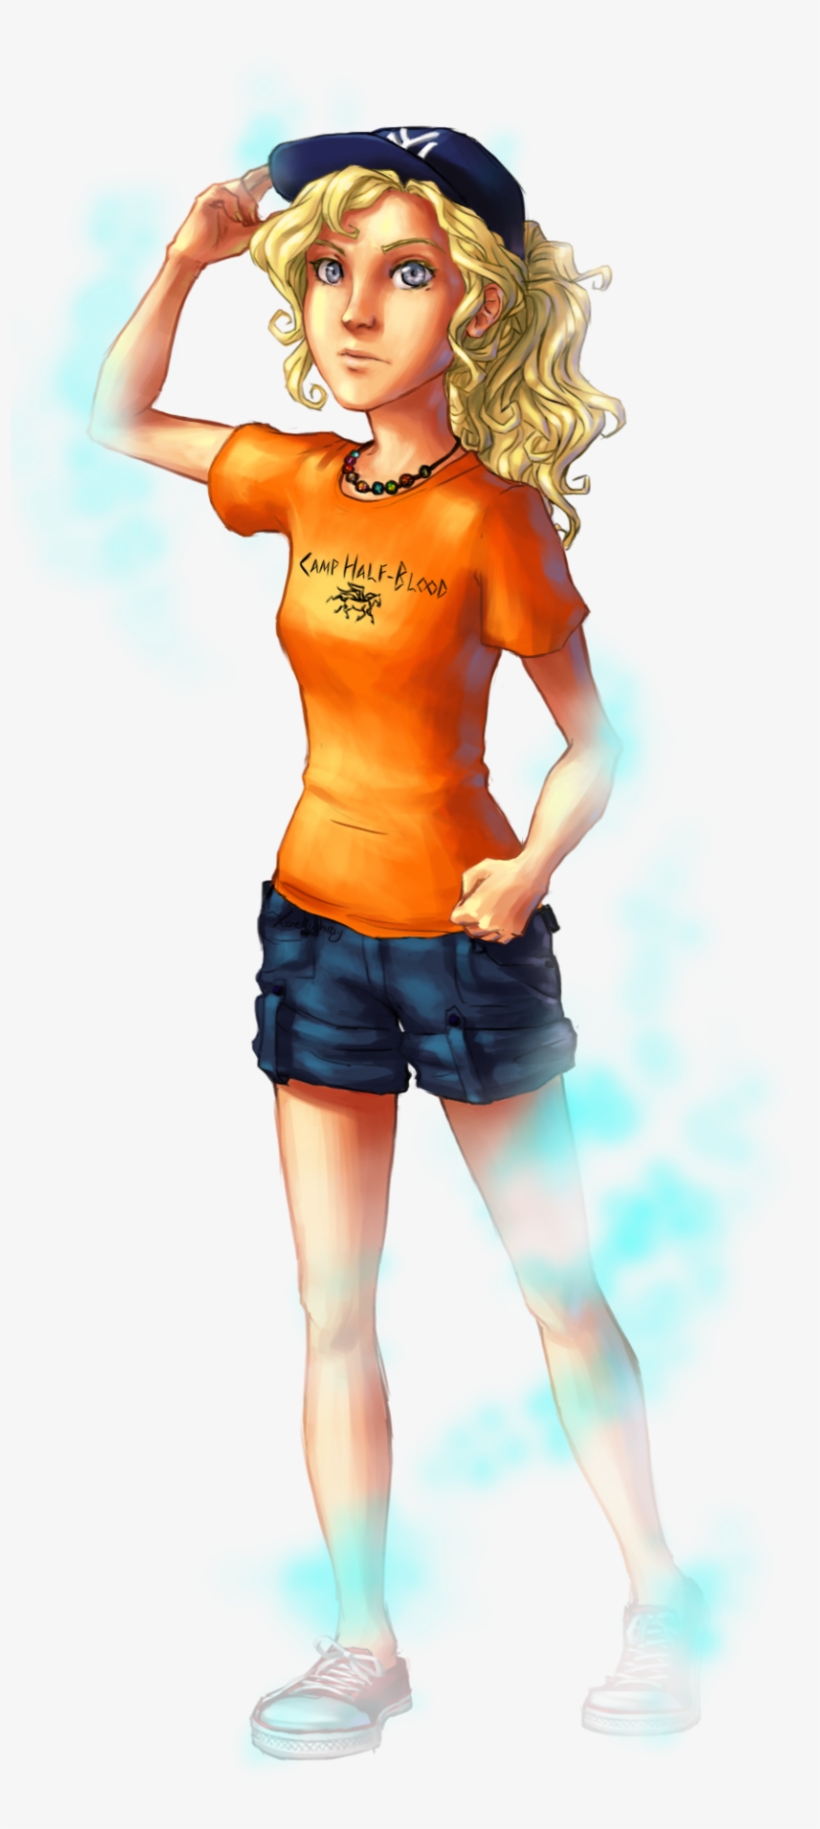 Annabeth Chase Becoming Invisible Apollo Percy Jackson, - Annabeth Chase Fanart Transparent, transparent png #3047001